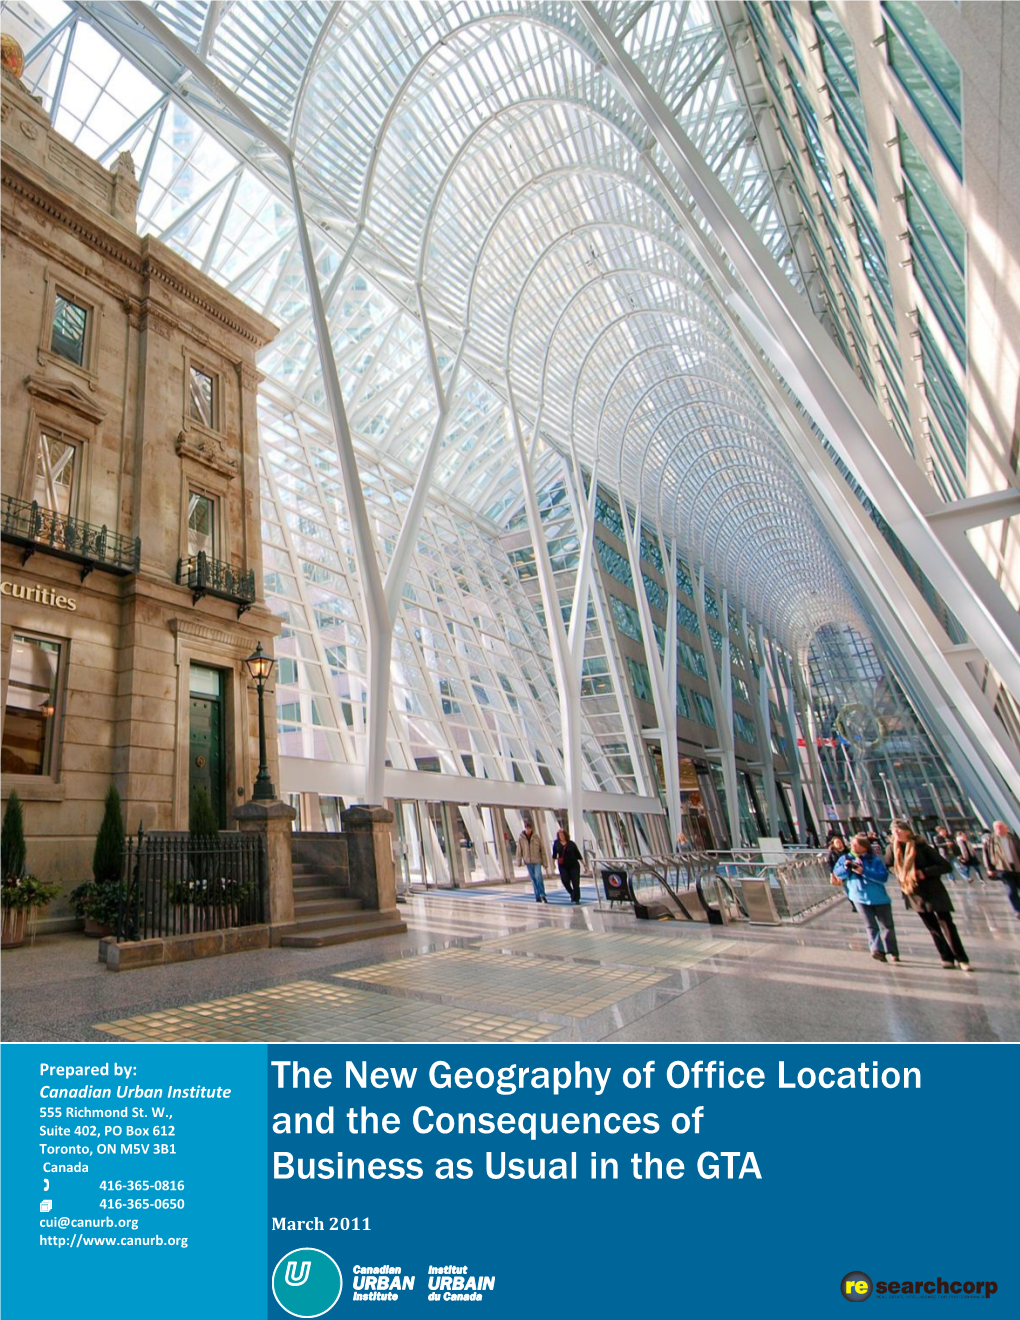 The New Geography of Office Location and The